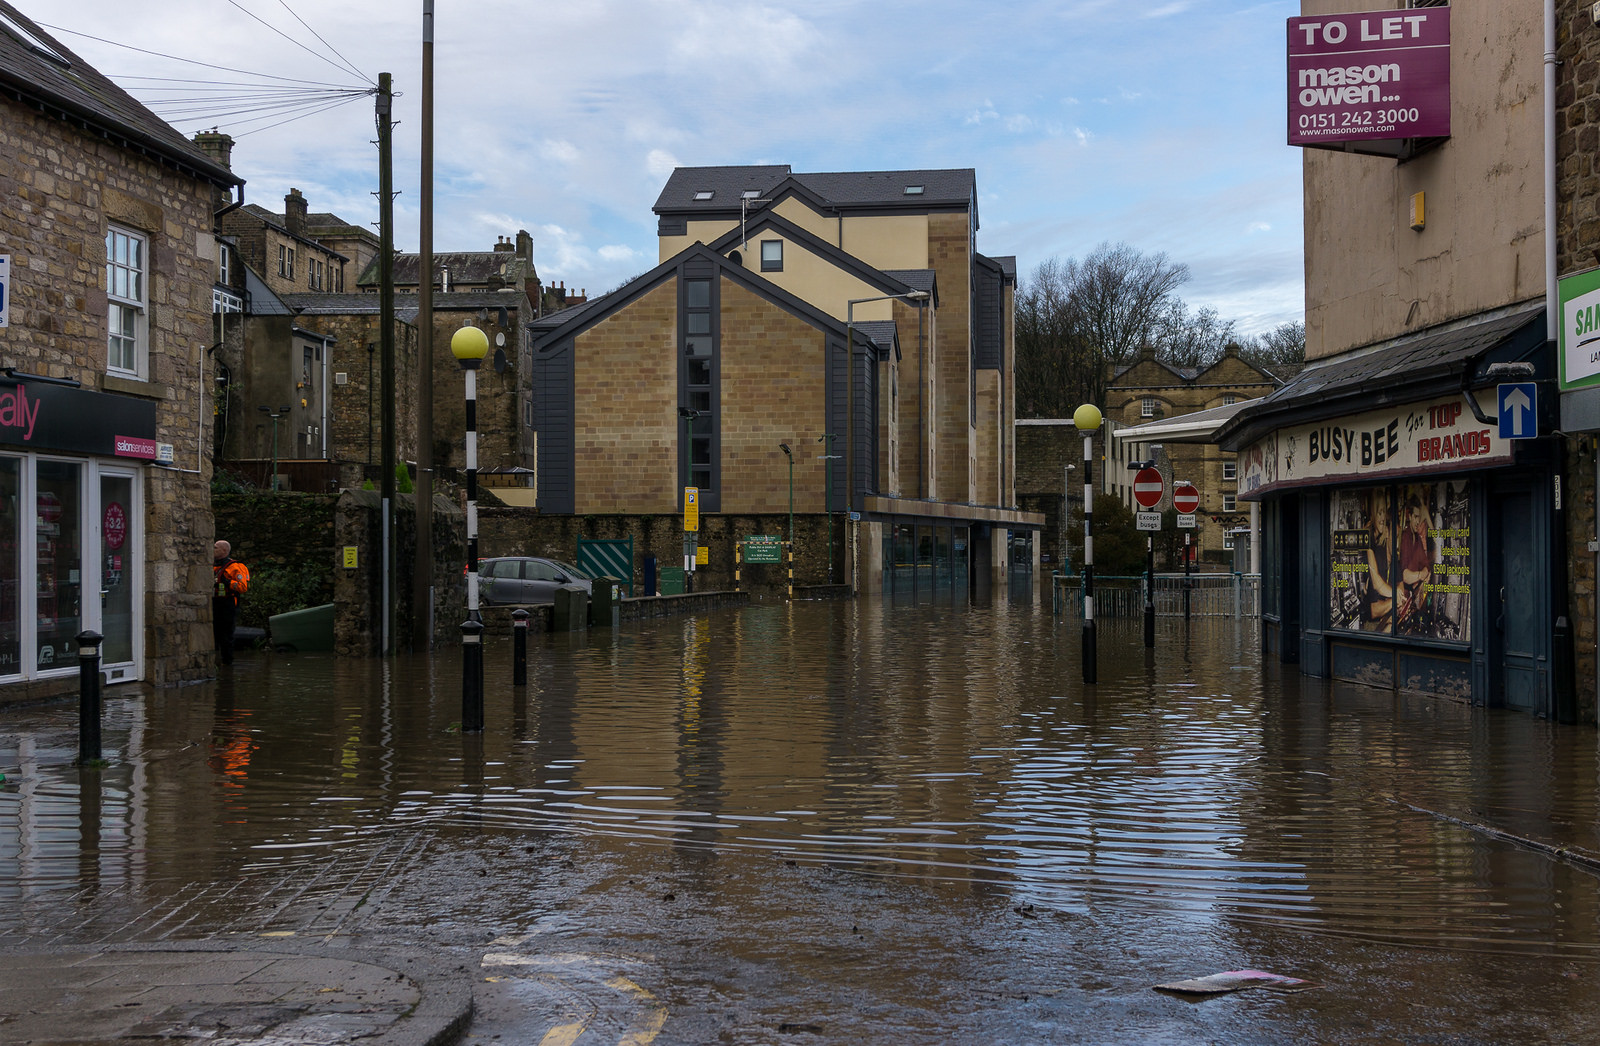 The Lancaster floods and mobile work